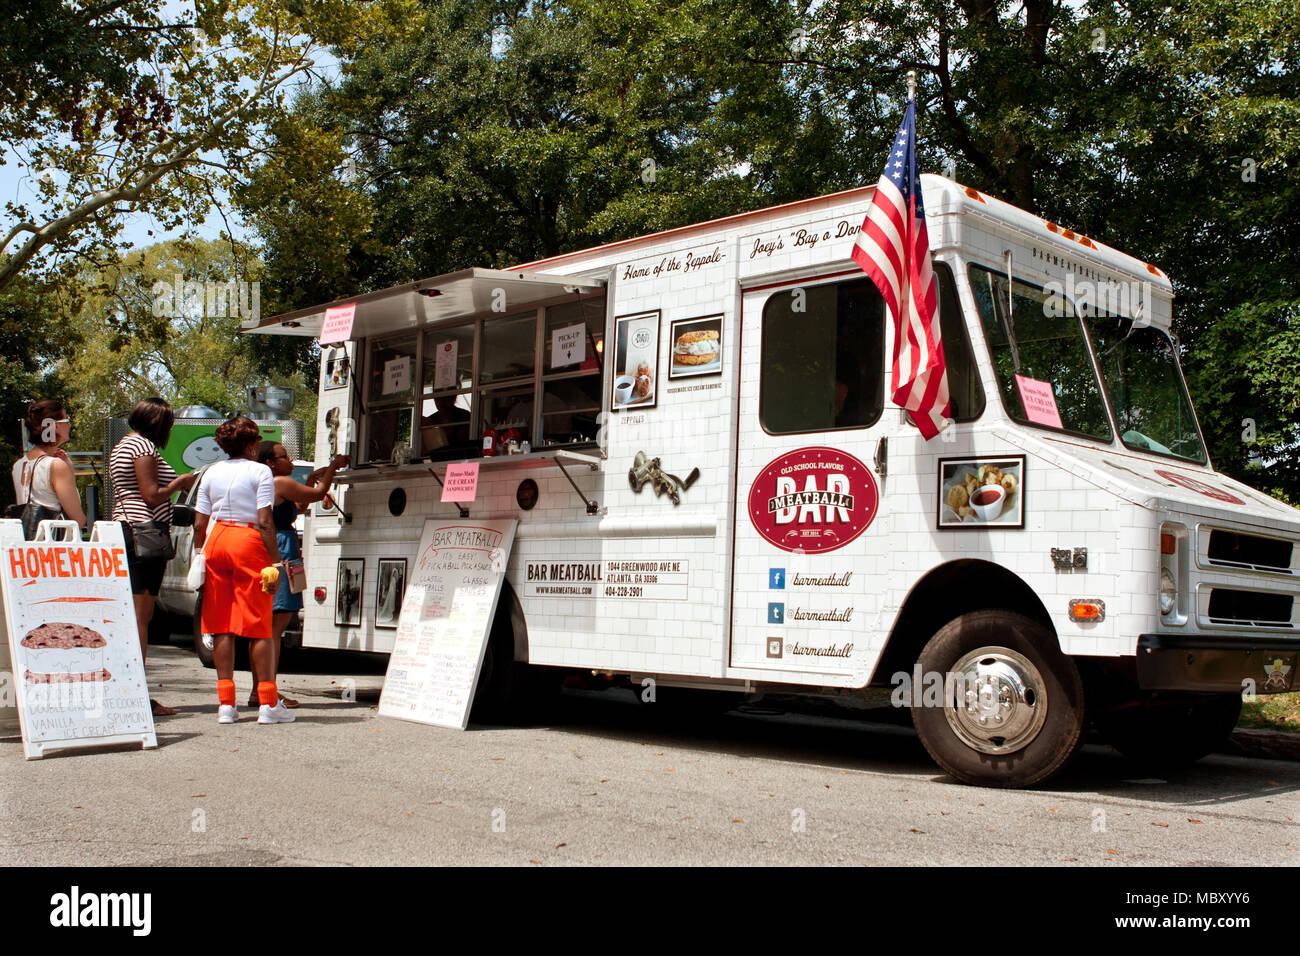 Atlanta, GA, USA - August 16, 2014:  Customers stand in line to order meals from a food truck at the Piedmont Park Arts Festival. Stock Photo